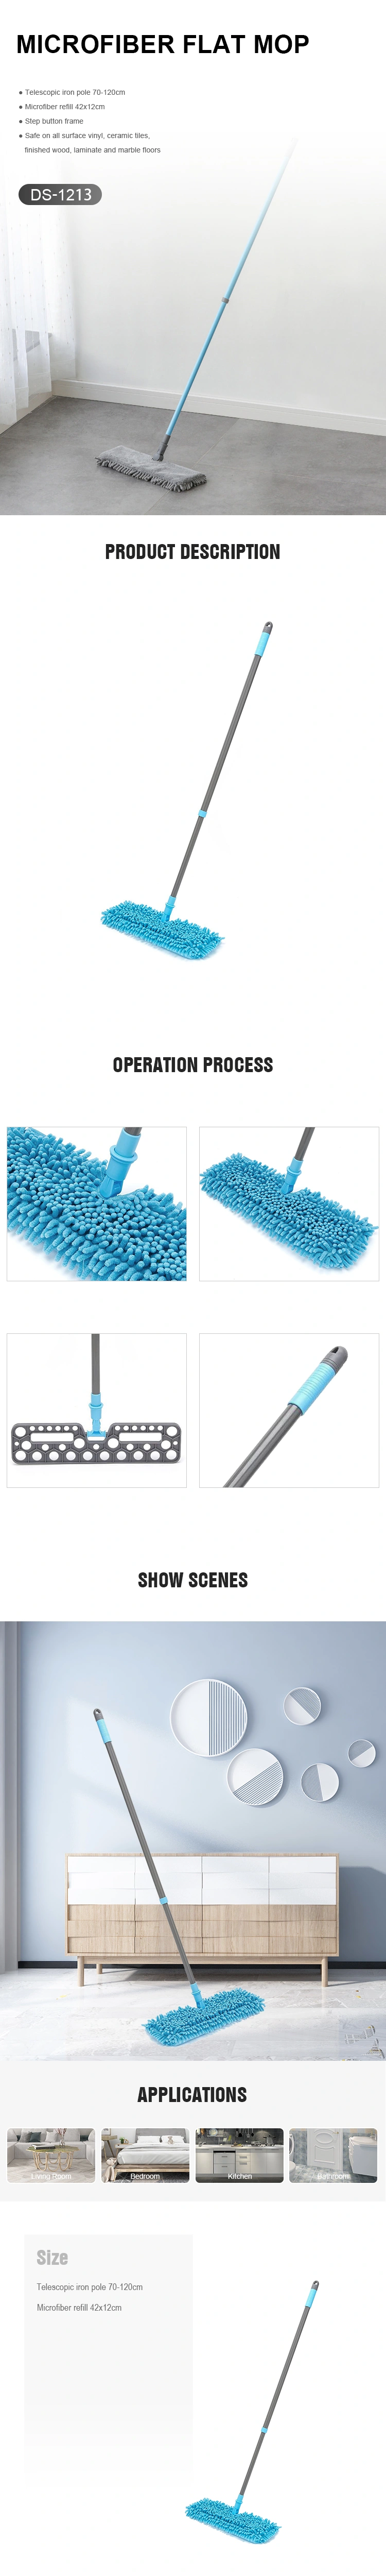 NEW retractable handle Double-Sided Floor Dust Flat cleaning Mop for household cleaning